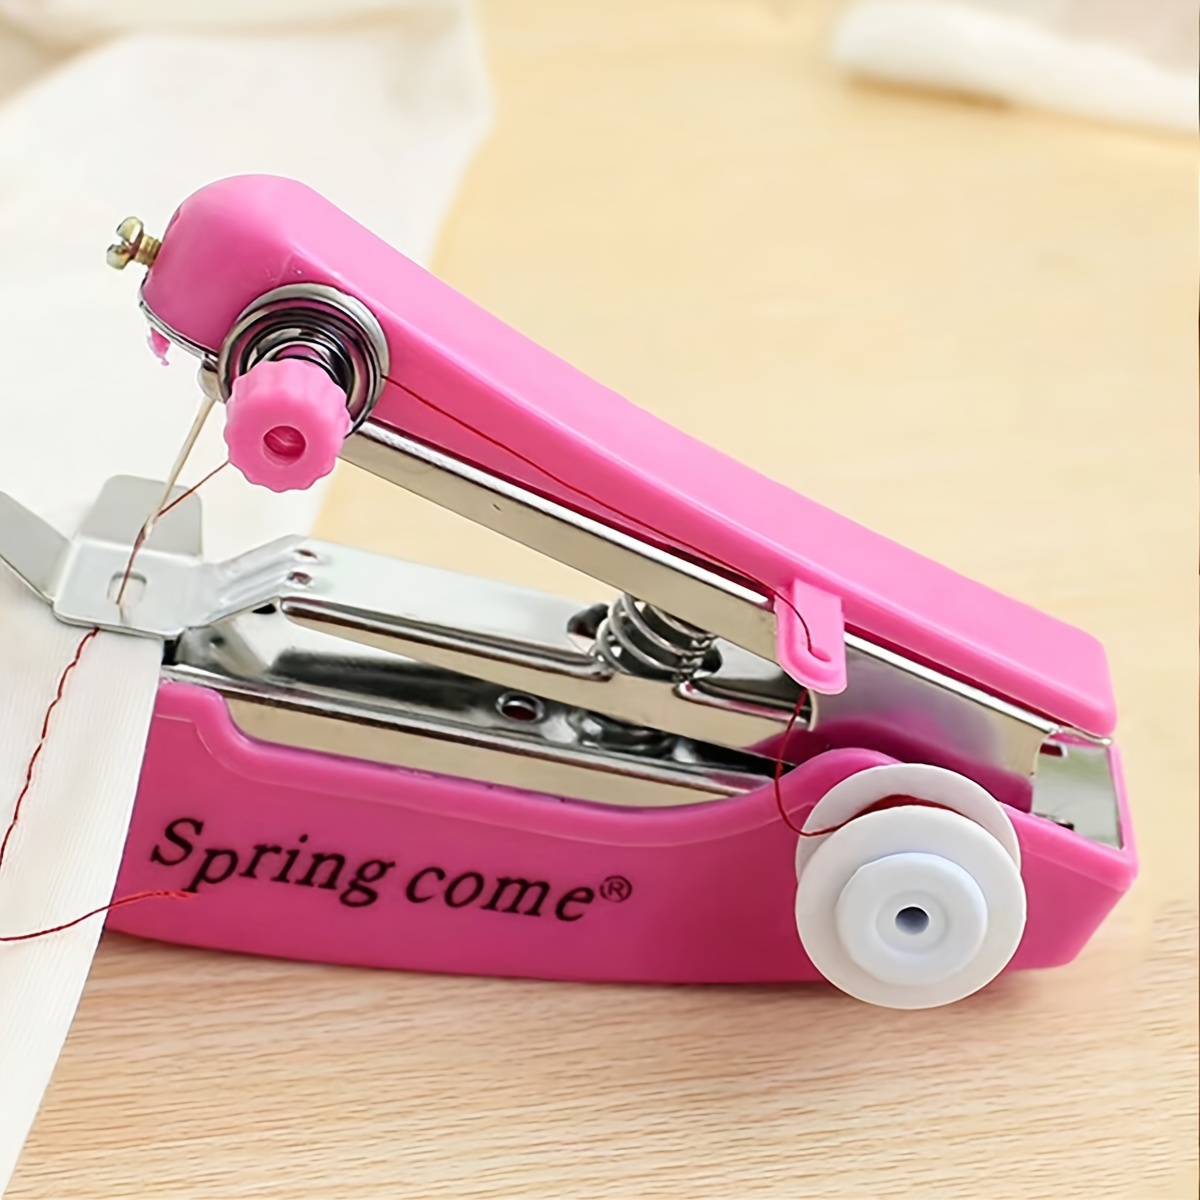 

Mini Portable Manual Sewing Machine - Handheld Multifunctional Pocket Tailor Tool For Home Use - No Electricity Required - Available In White, Black, Bright Pink, Silver Grey